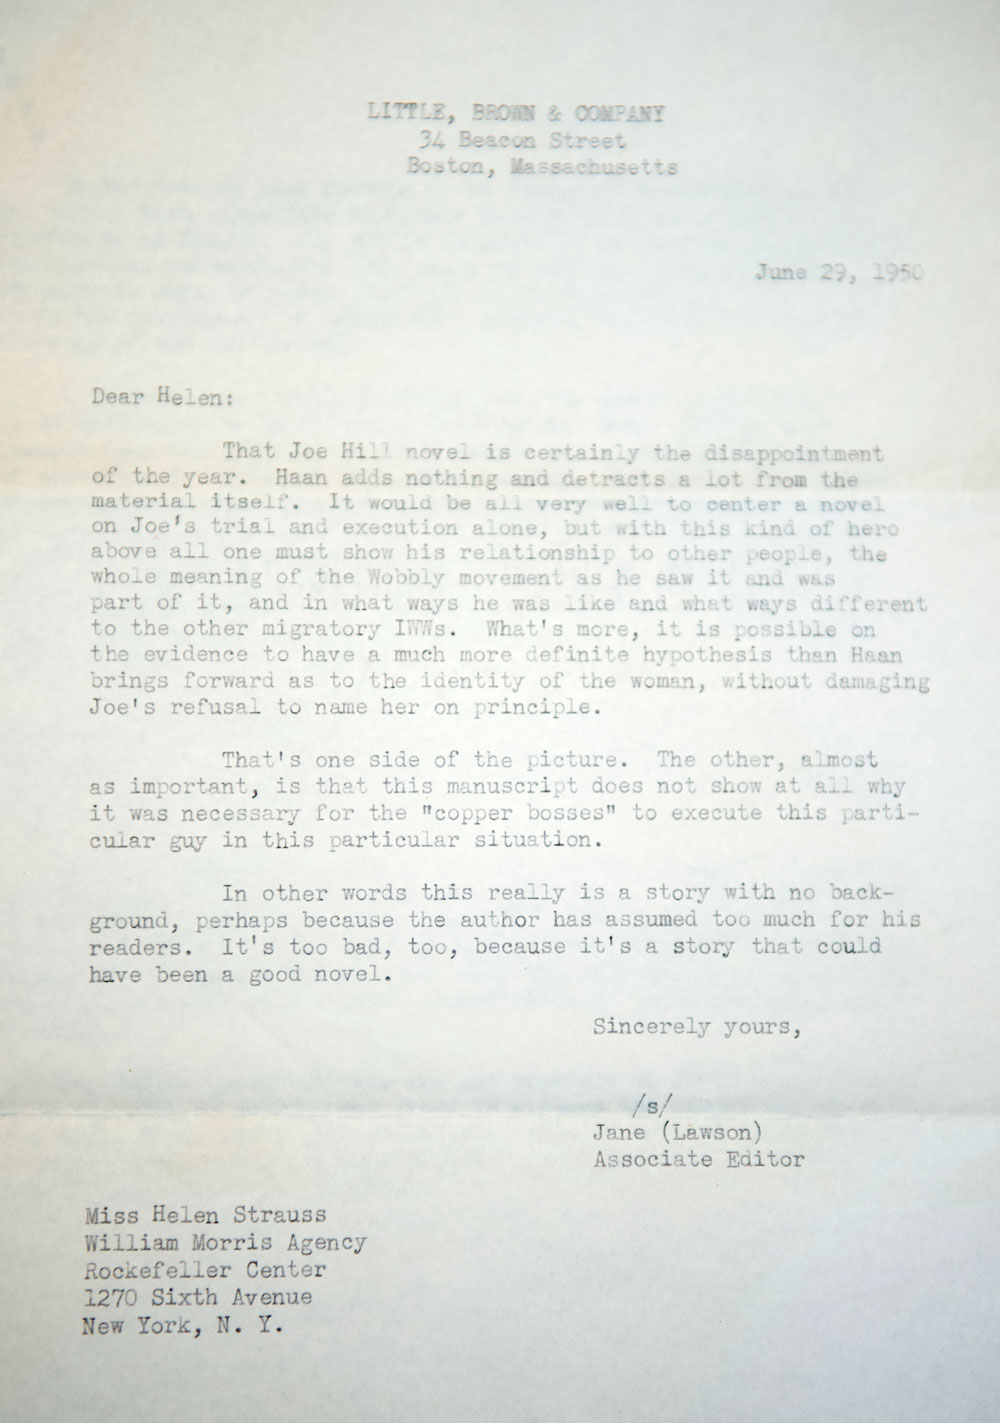 Letter from Jane Lawson